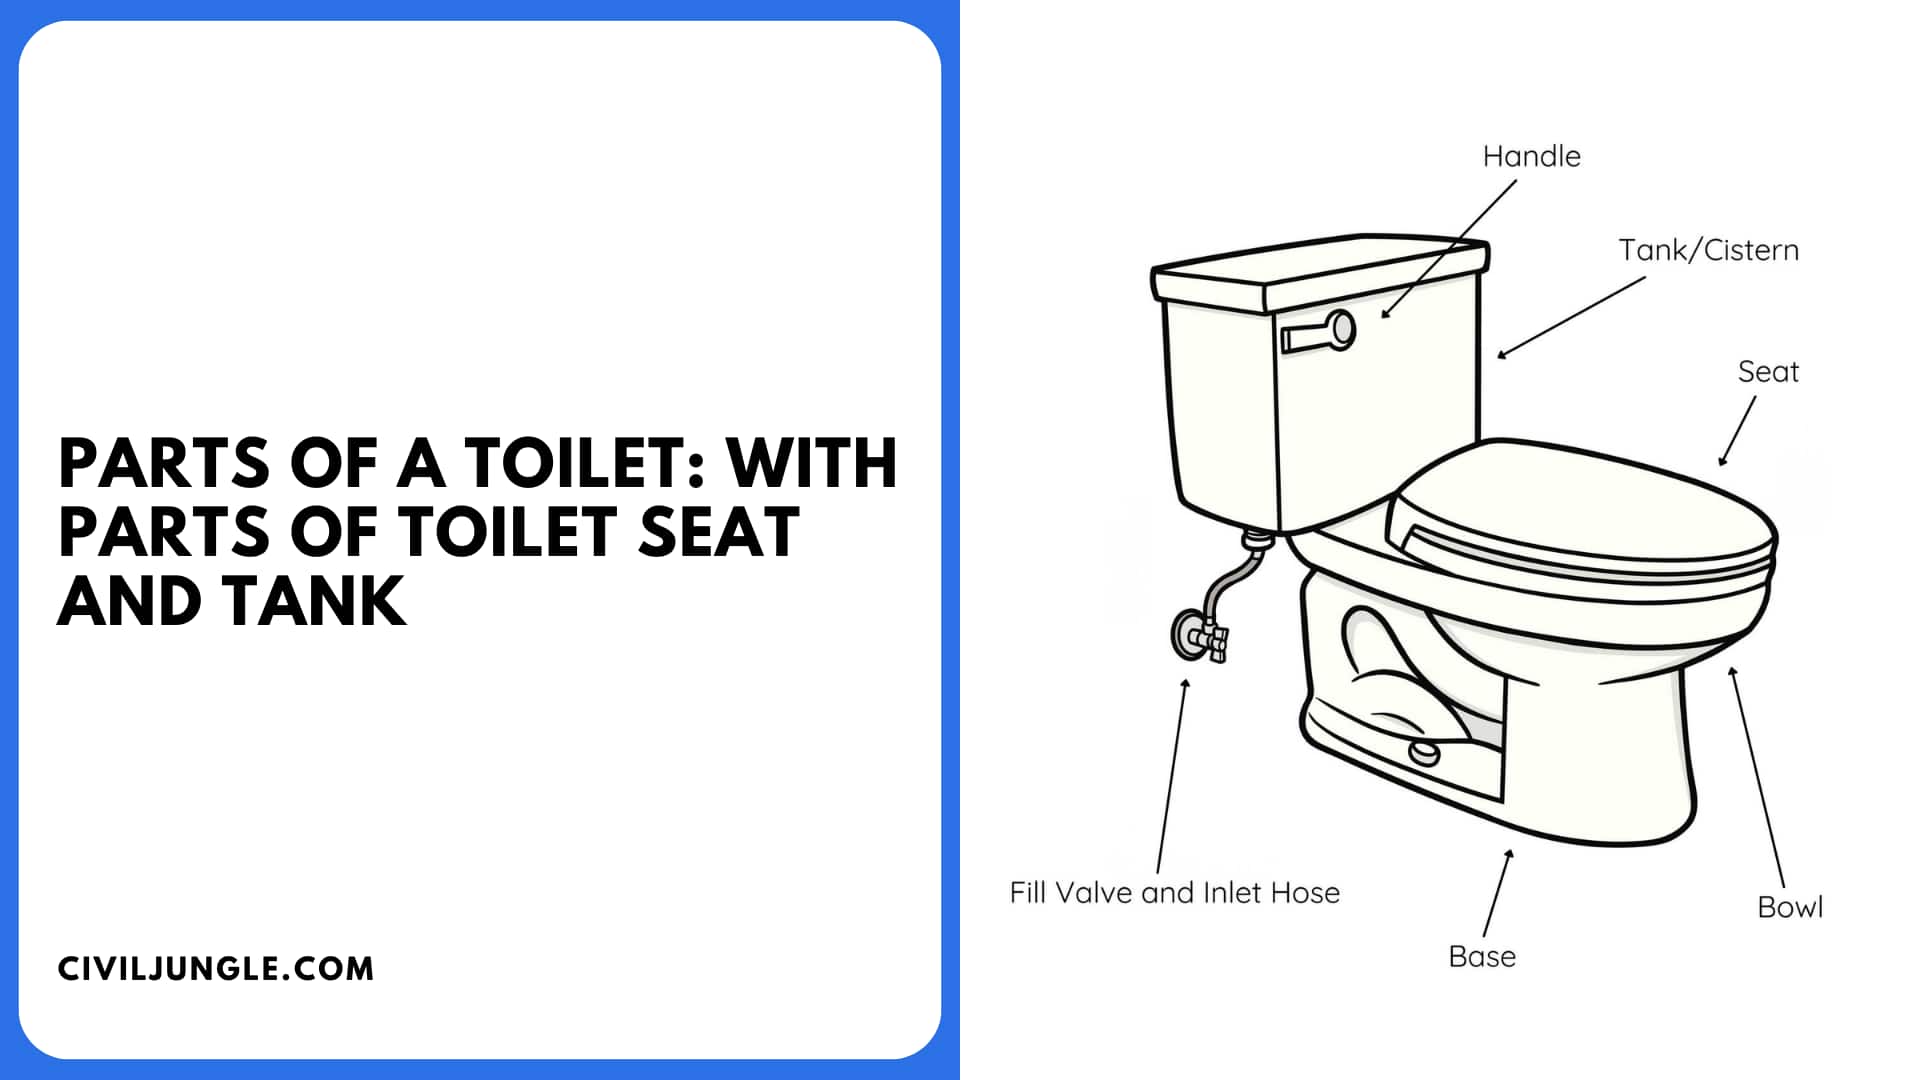 Parts of a Toilet: With Parts of Toilet Seat and Tank